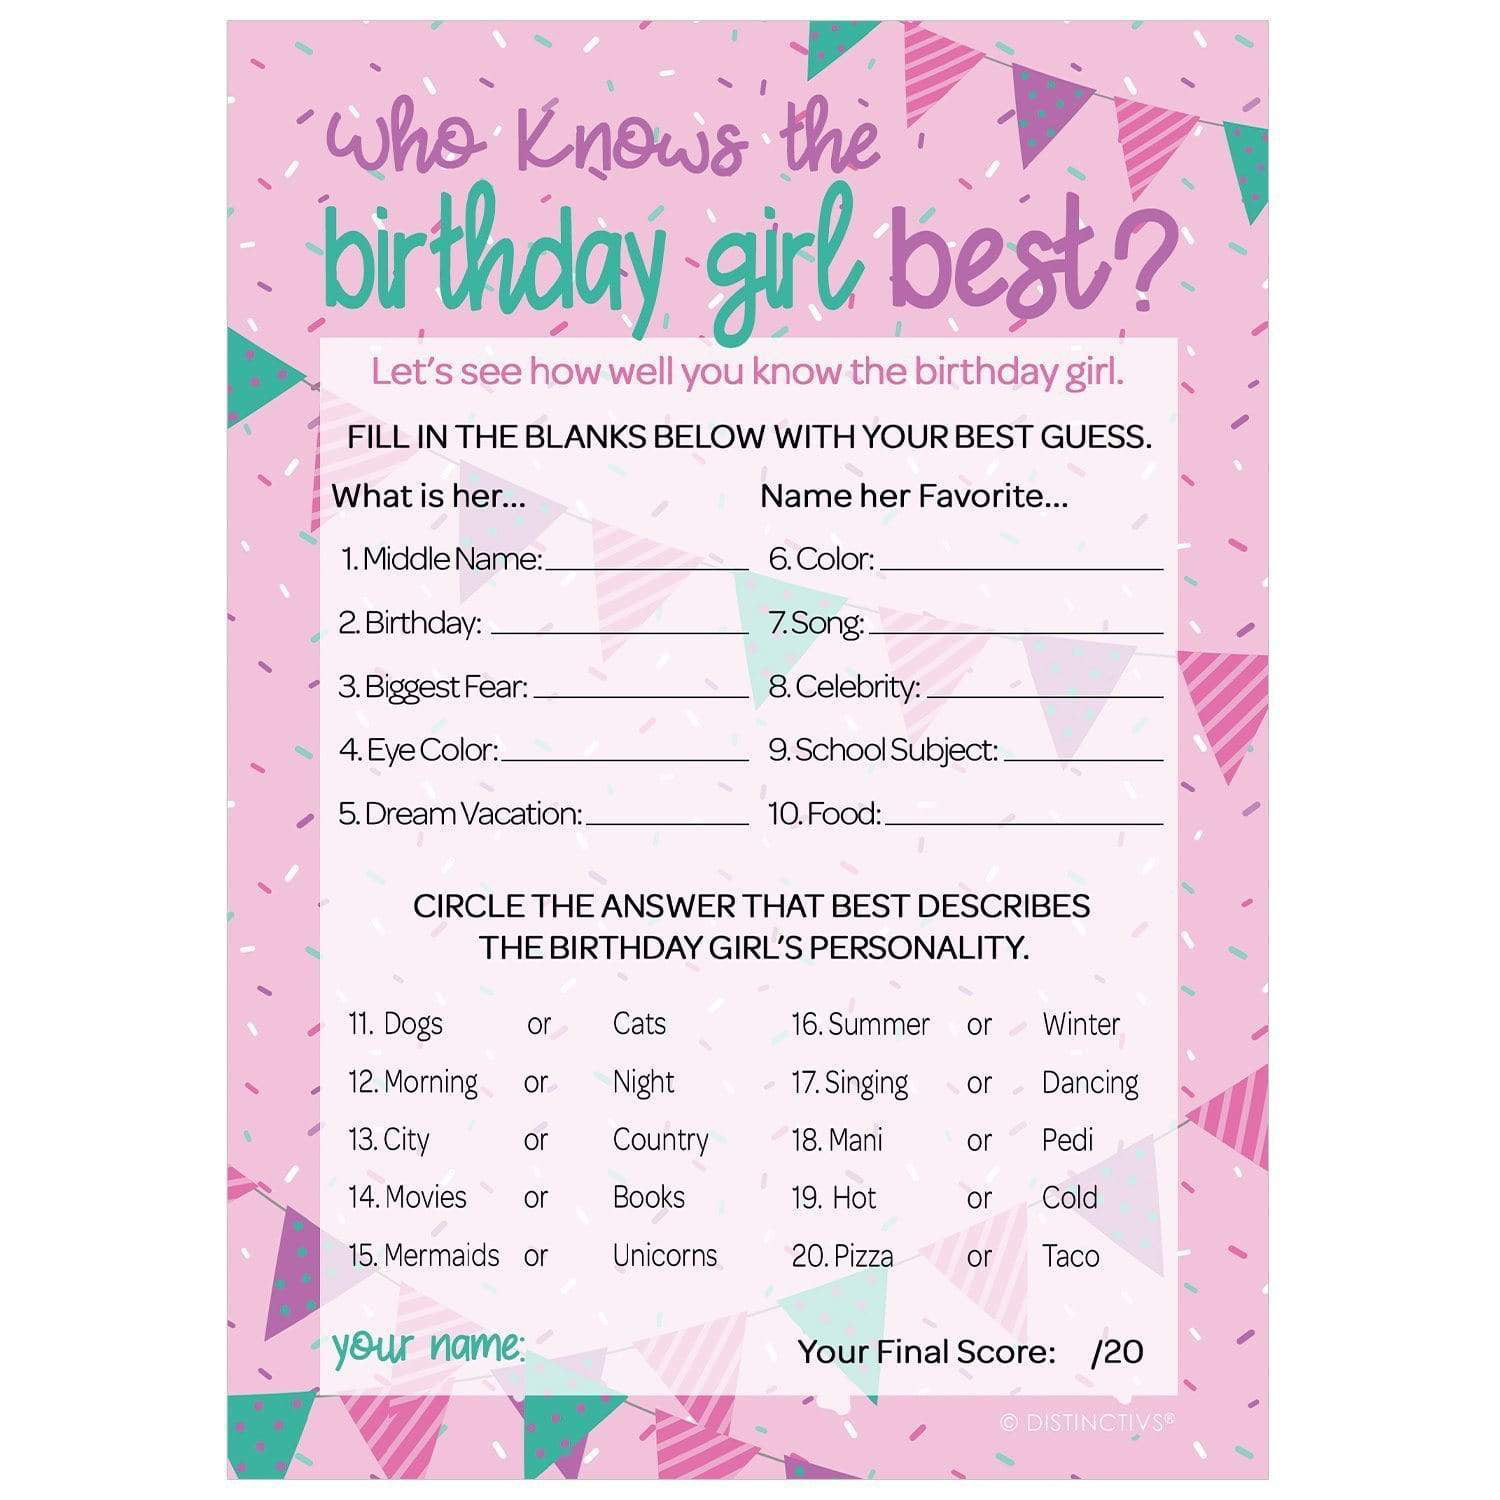 Who Knows the Birthday Girl Best Birthday Party Game 10 Player Cards